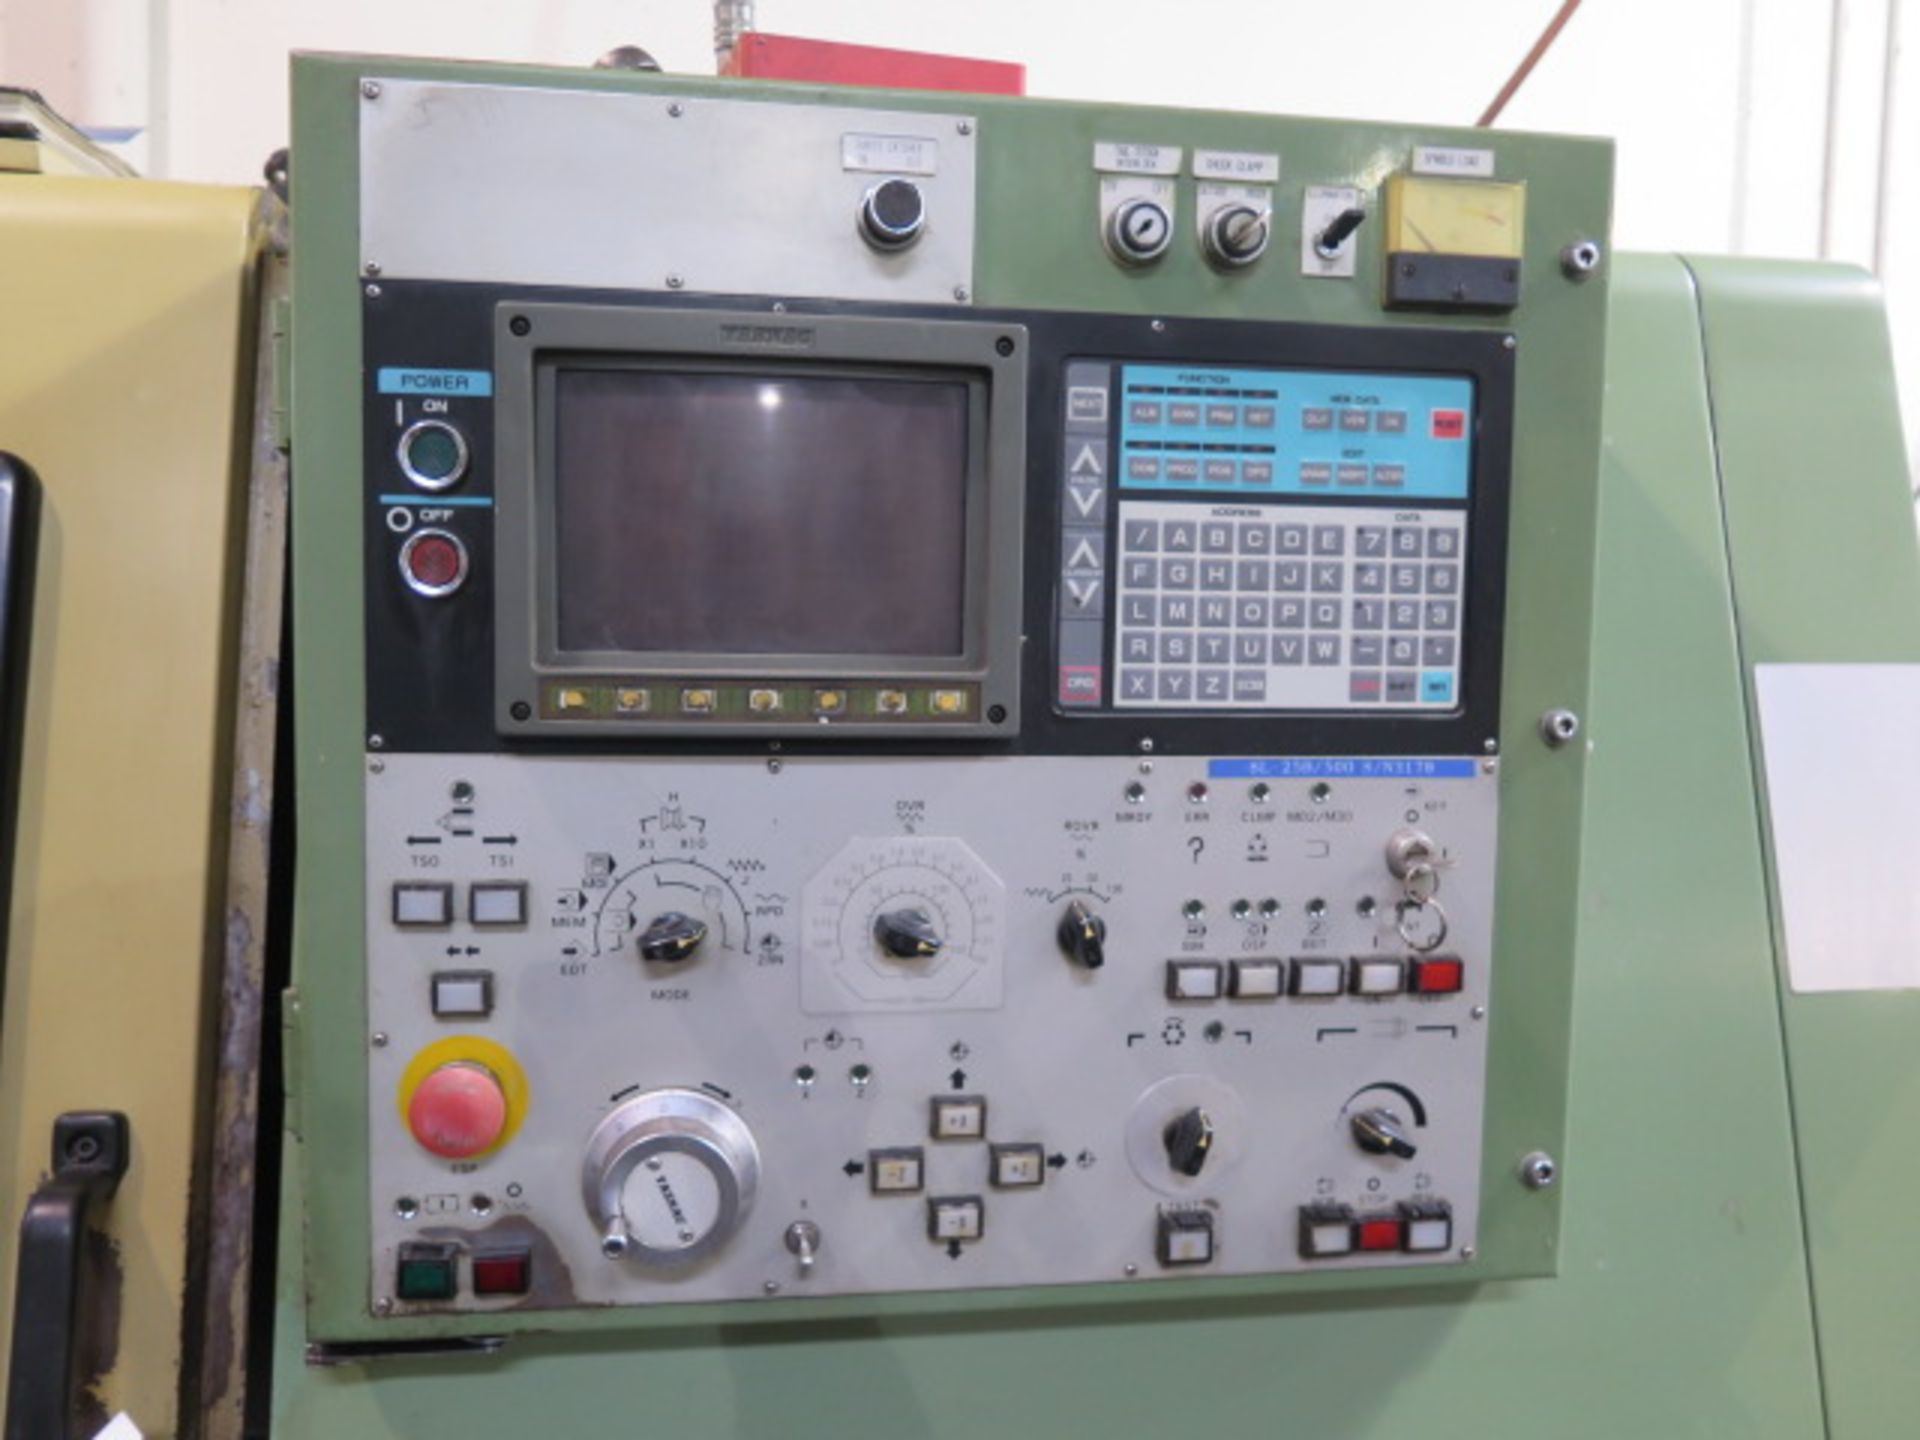 Mori Seiki SL-25 CNC Turning Center s/n 3178 w/ Yasnac Controls, 10-Station, Hydraulic, SOLD AS IS - Image 9 of 11